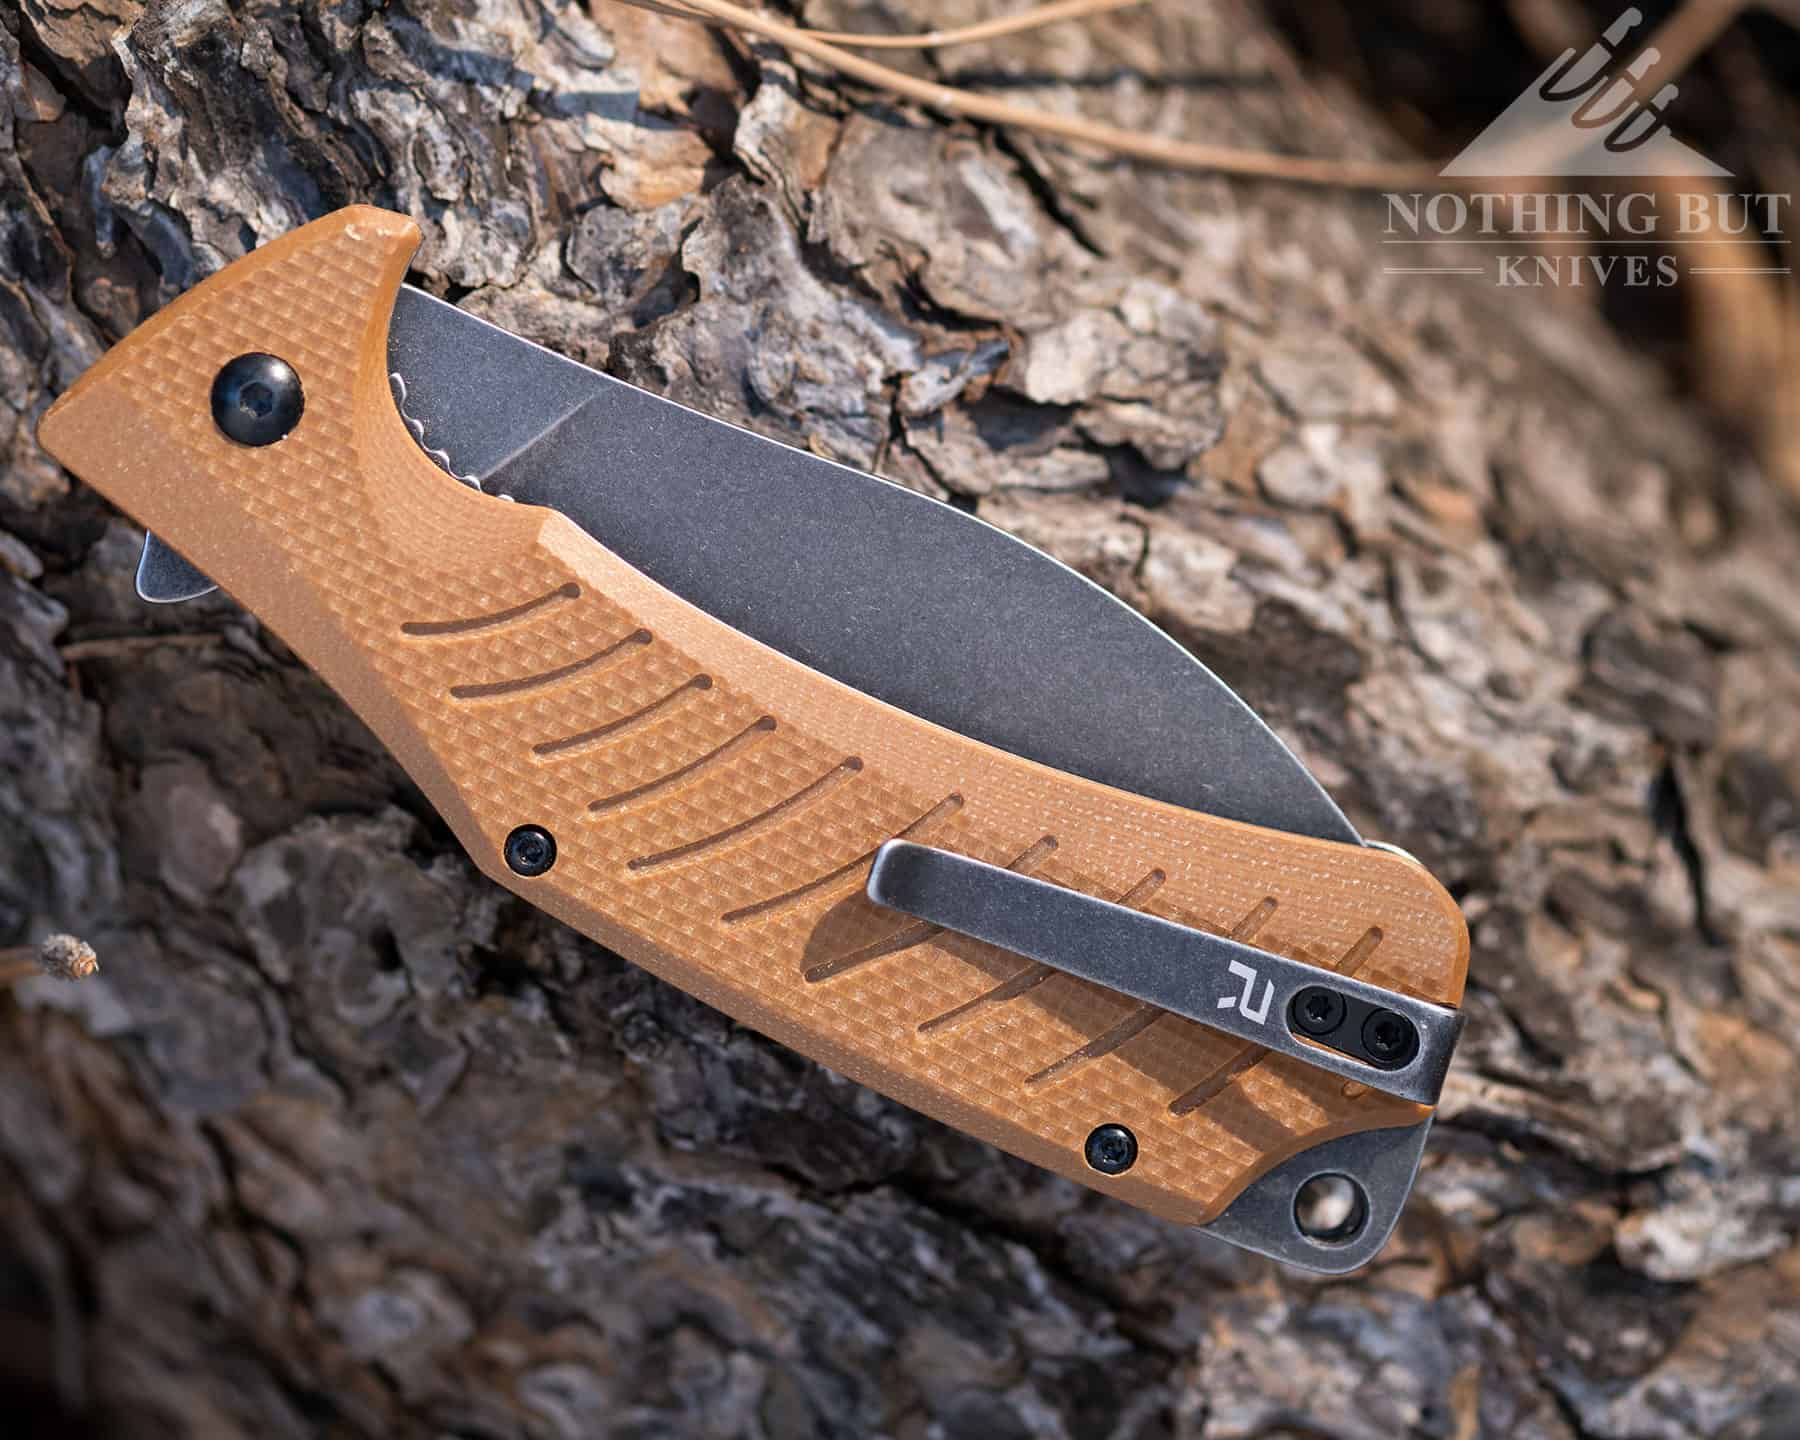 Revo is turning out great knives at decent prices. 